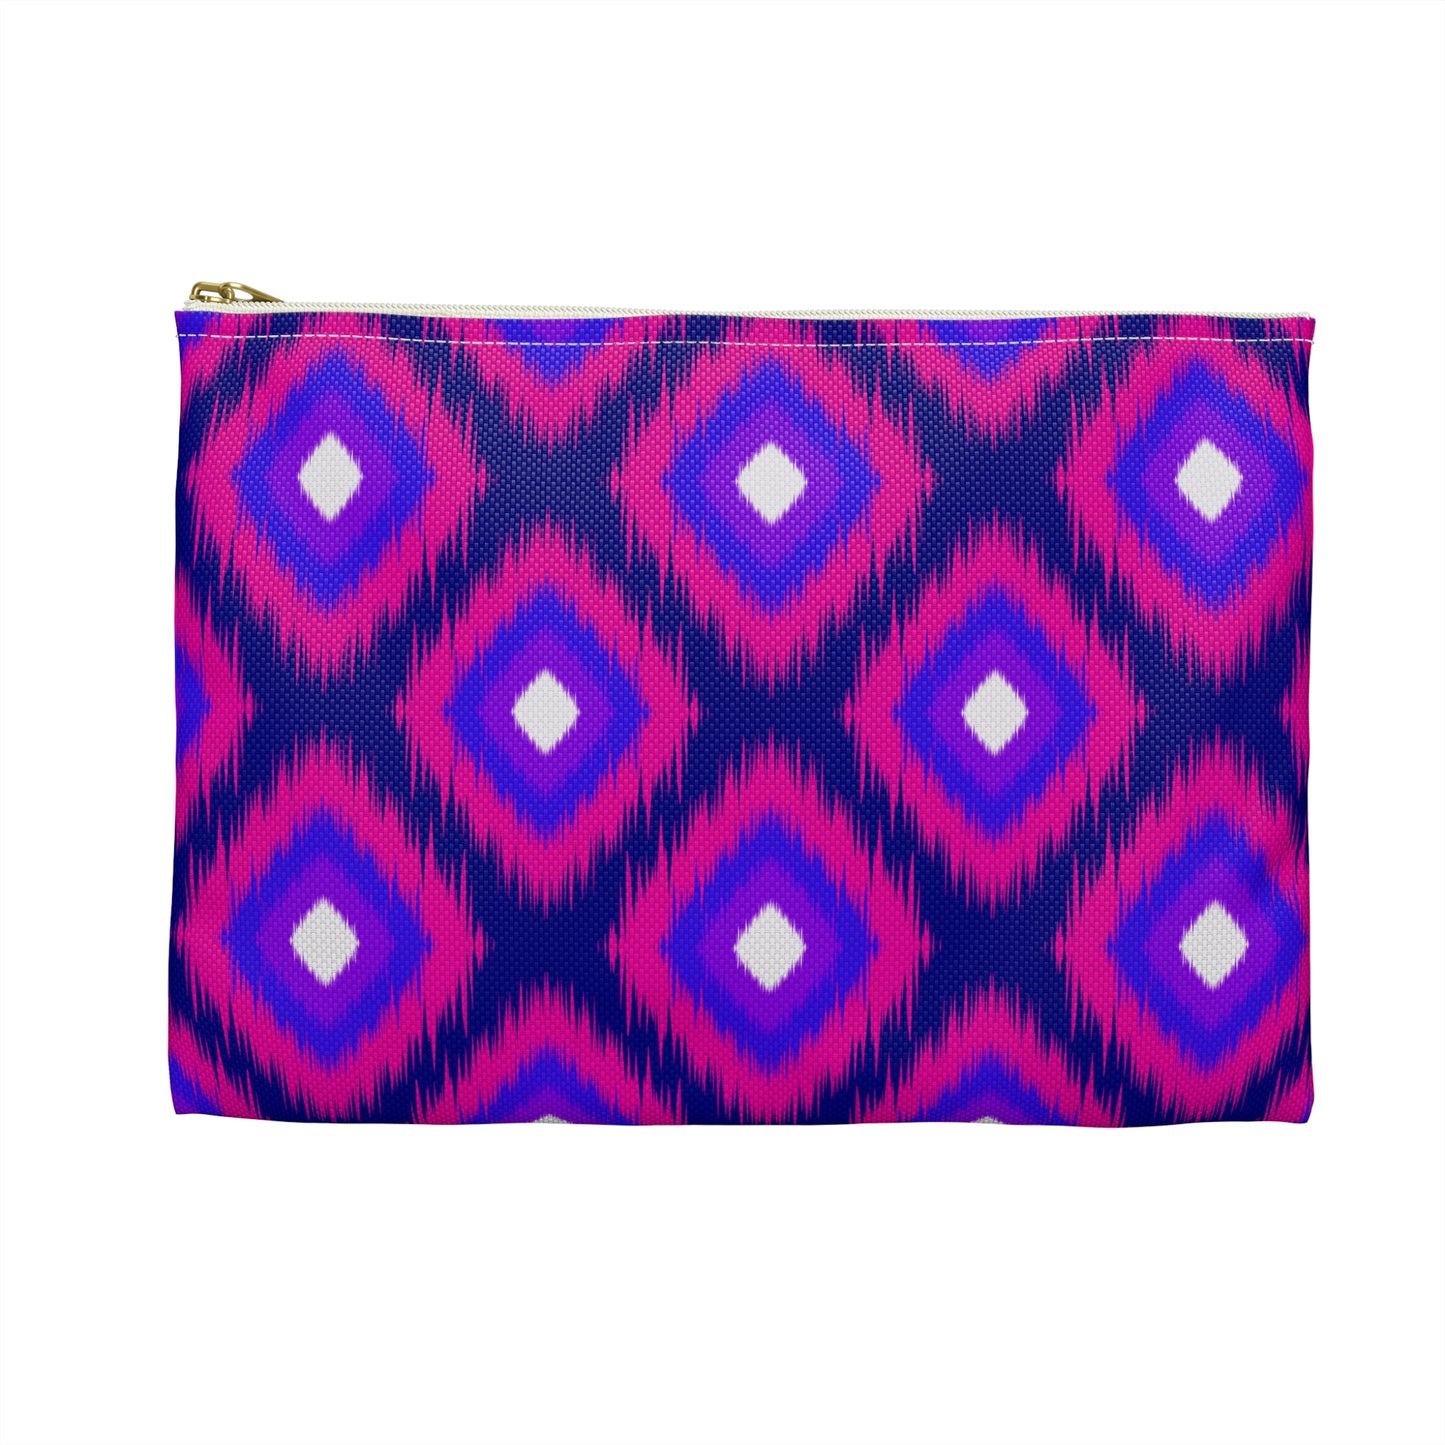 Small Mahjong Accessory Bag large enough to hold the Oversized League Cards & Other Mahjongg Accessories. Great Mah Jongg Gift. Purple IKAT.